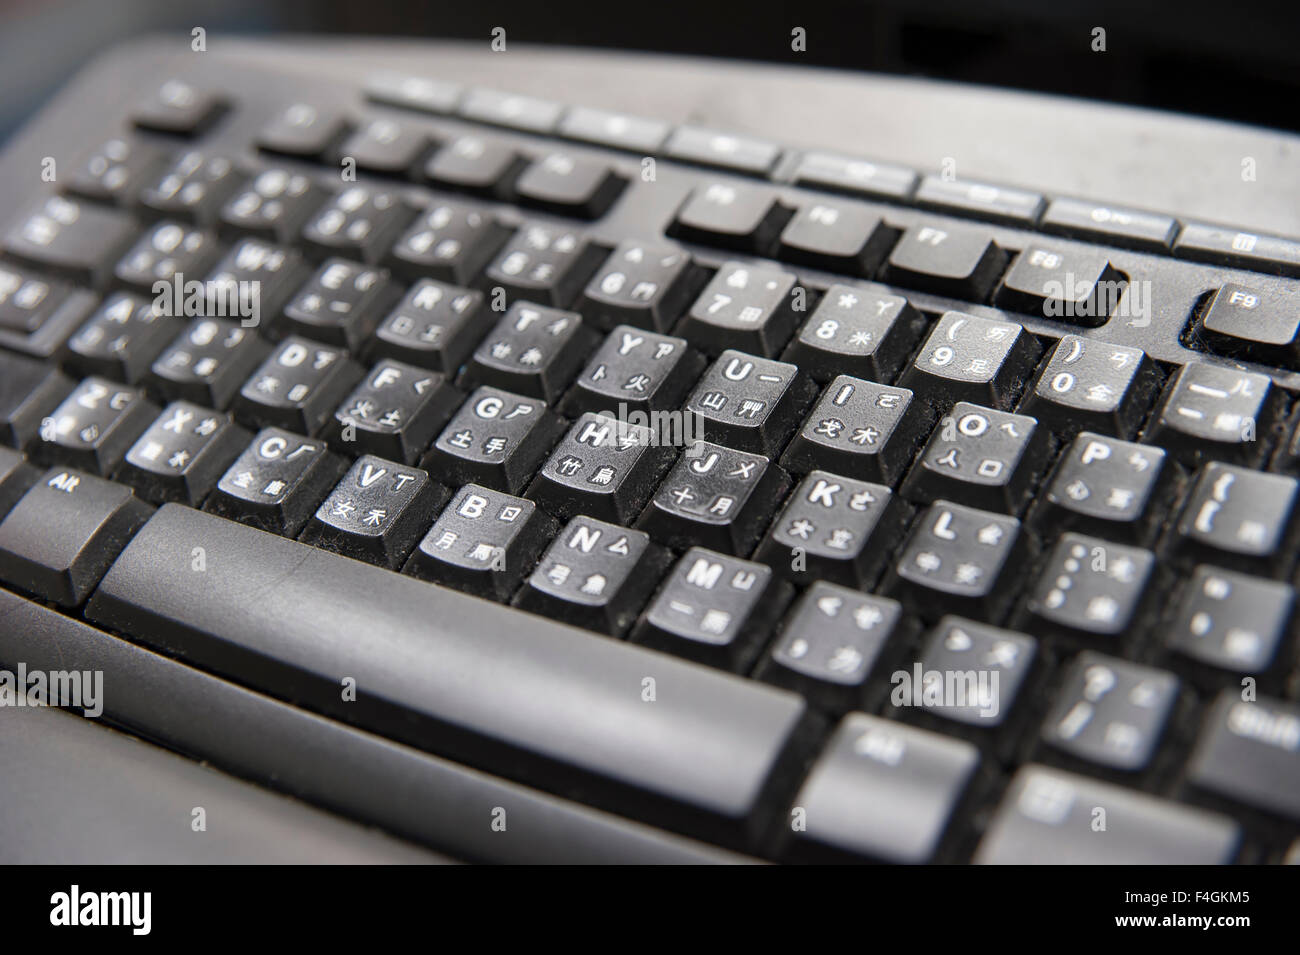 Special Keyboard for Chinese with Chinese character Stock Photo